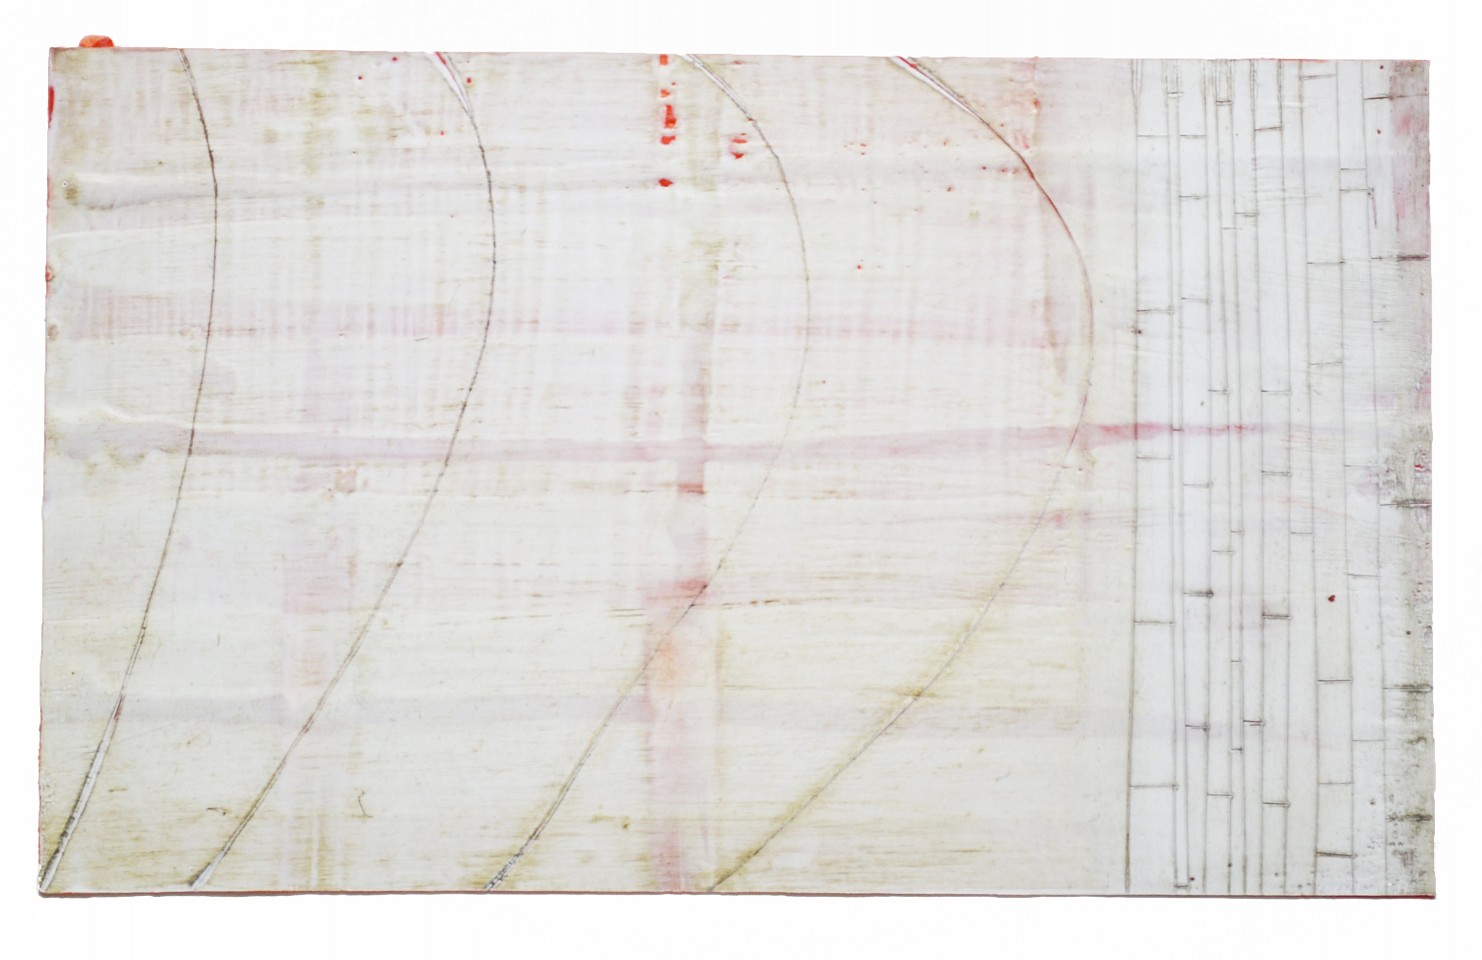 Don Maynard
Wind Through Bamboo, 2016
MAY372
encaustic, 20 x 26 inches paper / 10 x 16 inches image